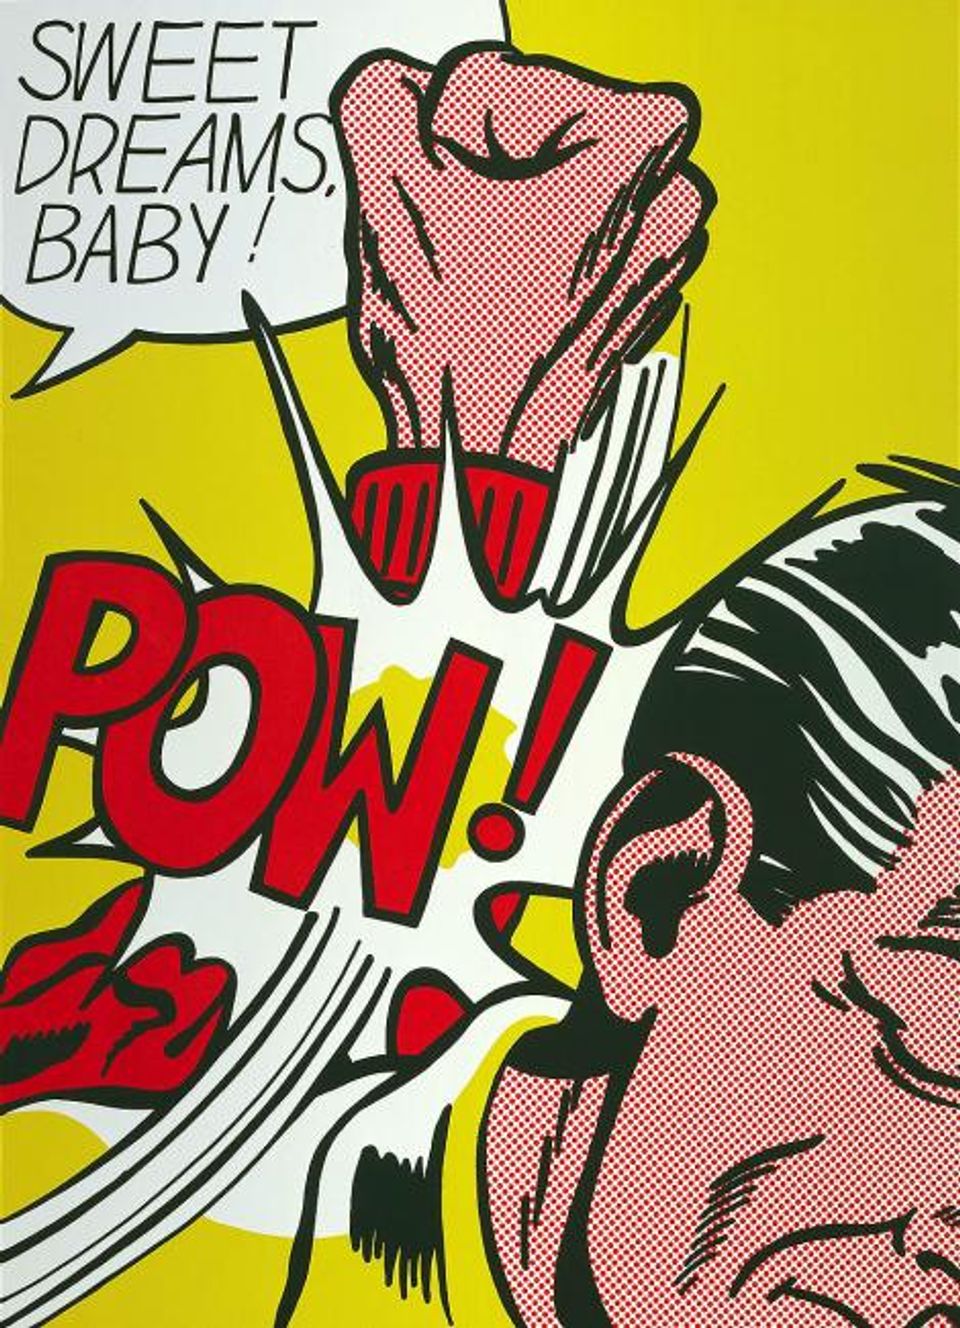 A pop art print of a cartoon animation of a man getting punched with the word "POW" and a yellow background.